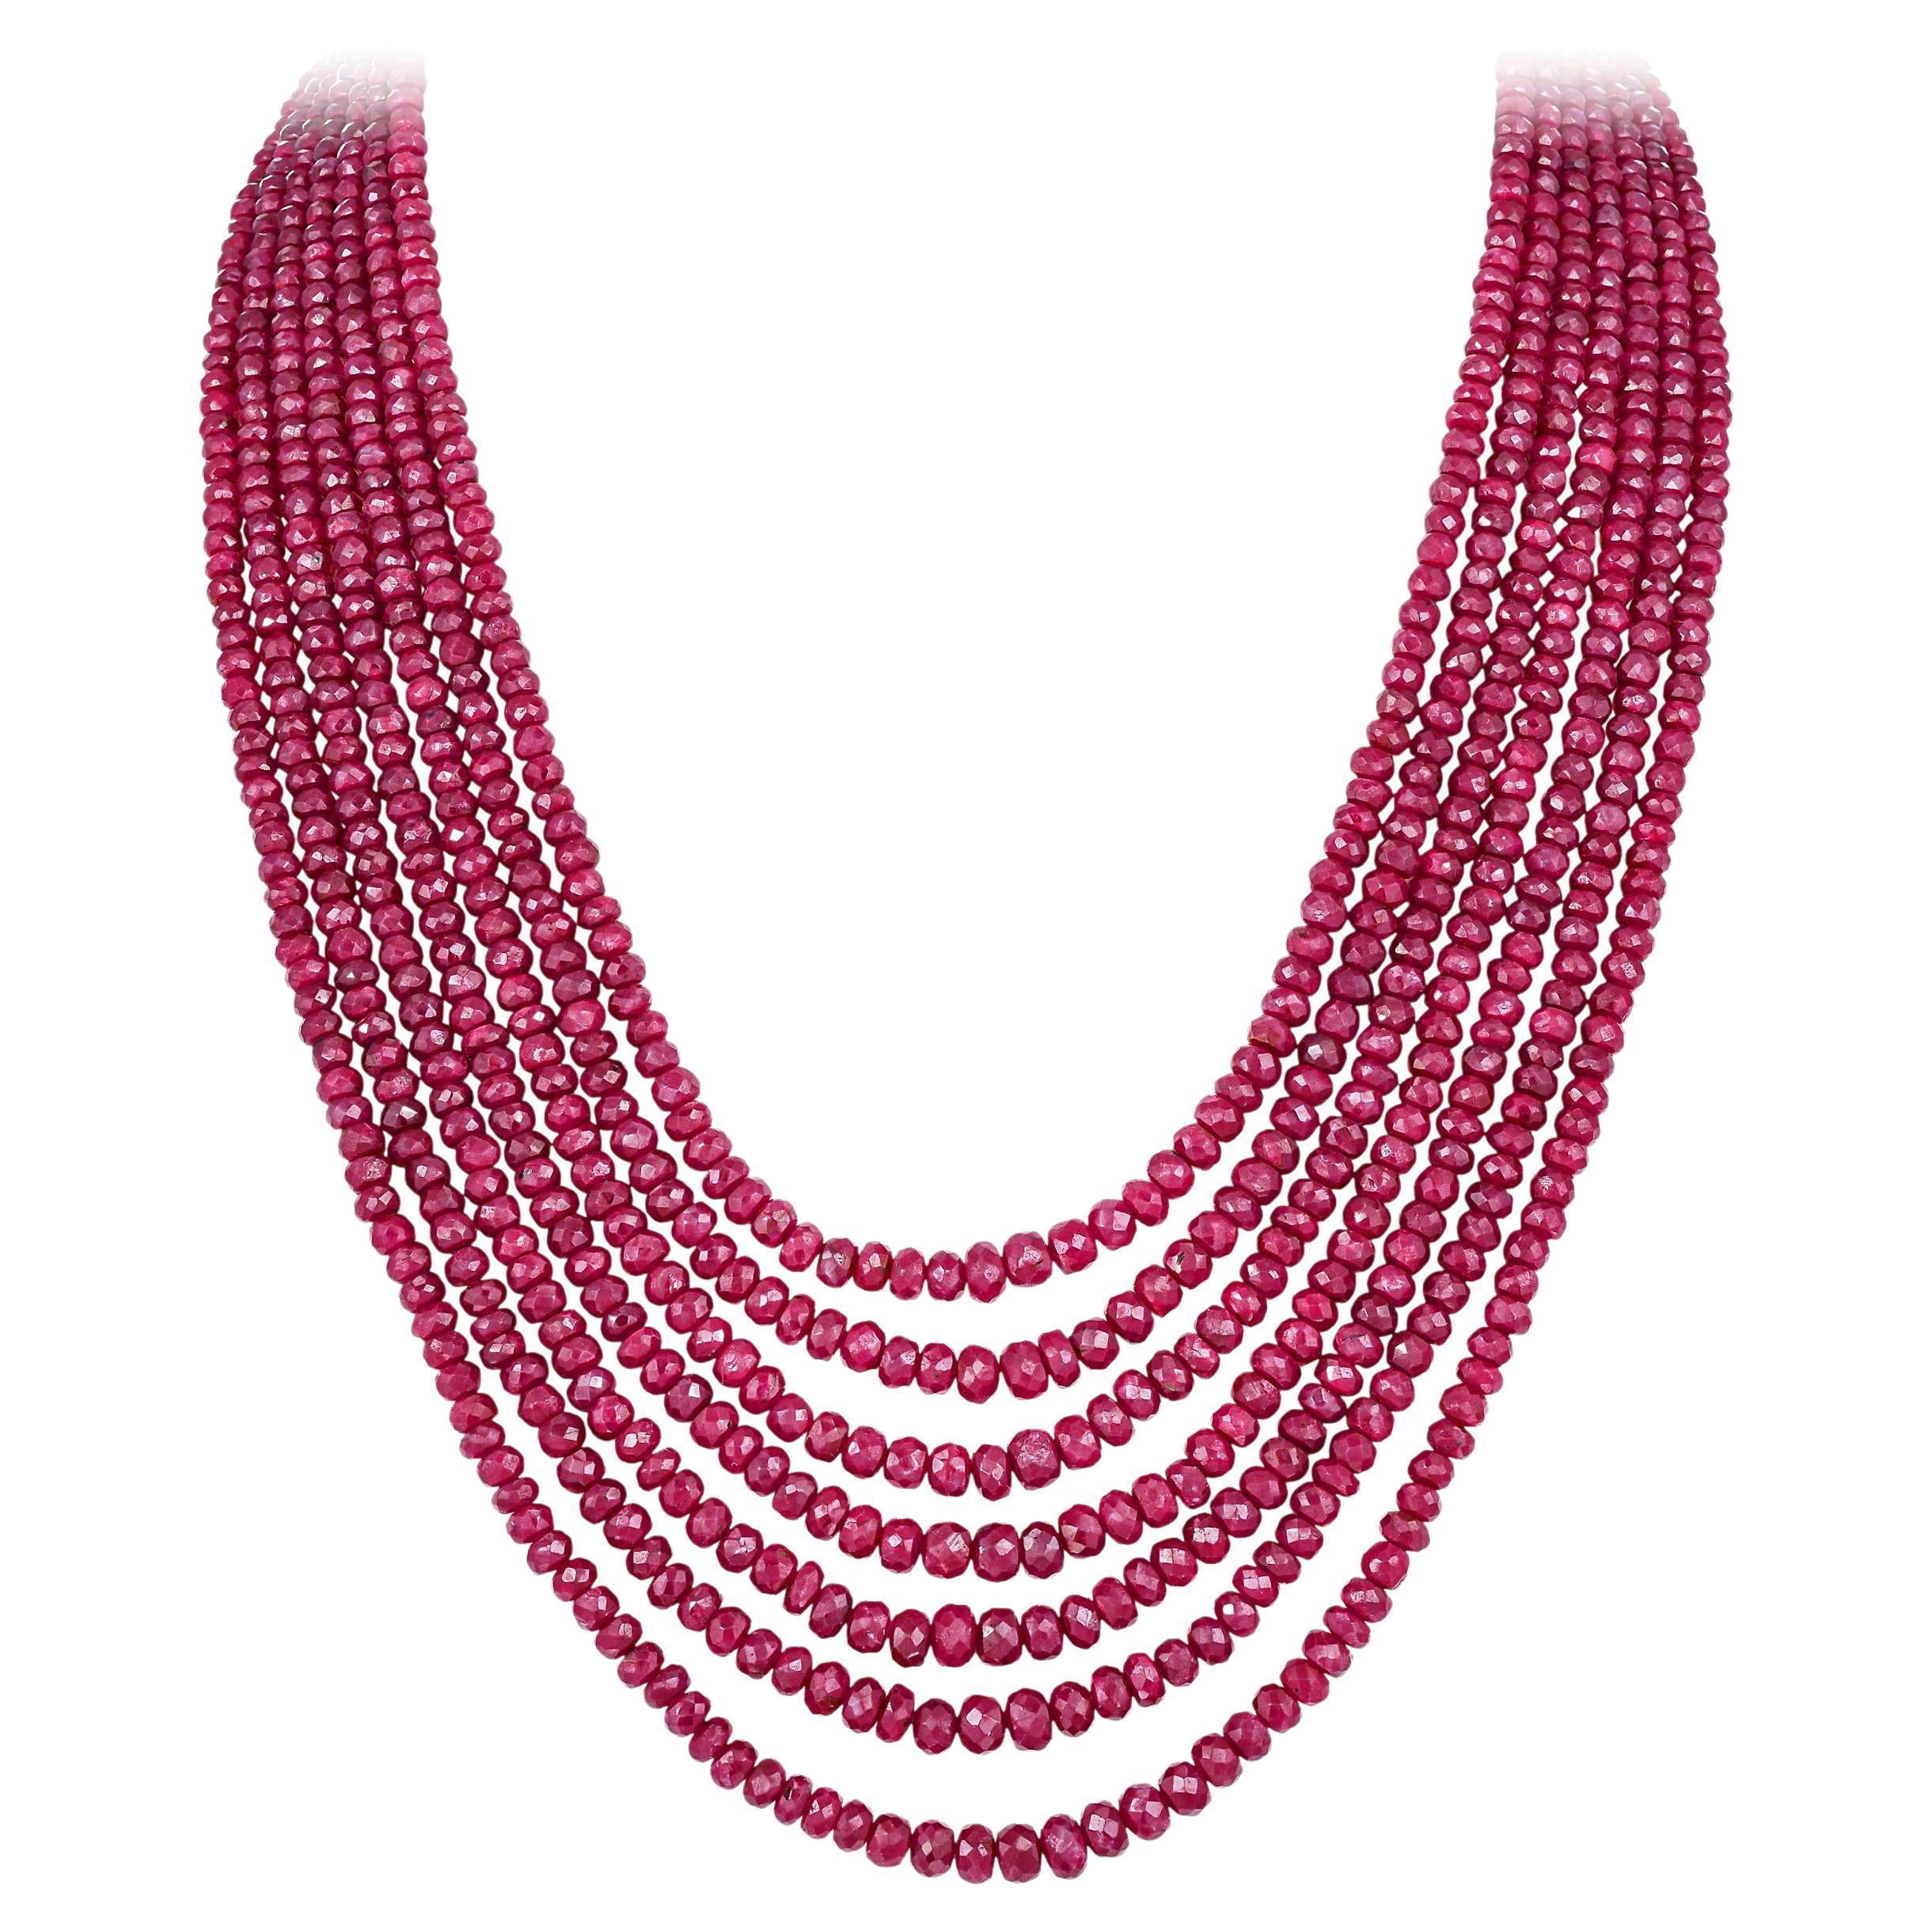 Important 560 Carats Ruby Bead Multi-Strand Necklace 16 Inches For Sale